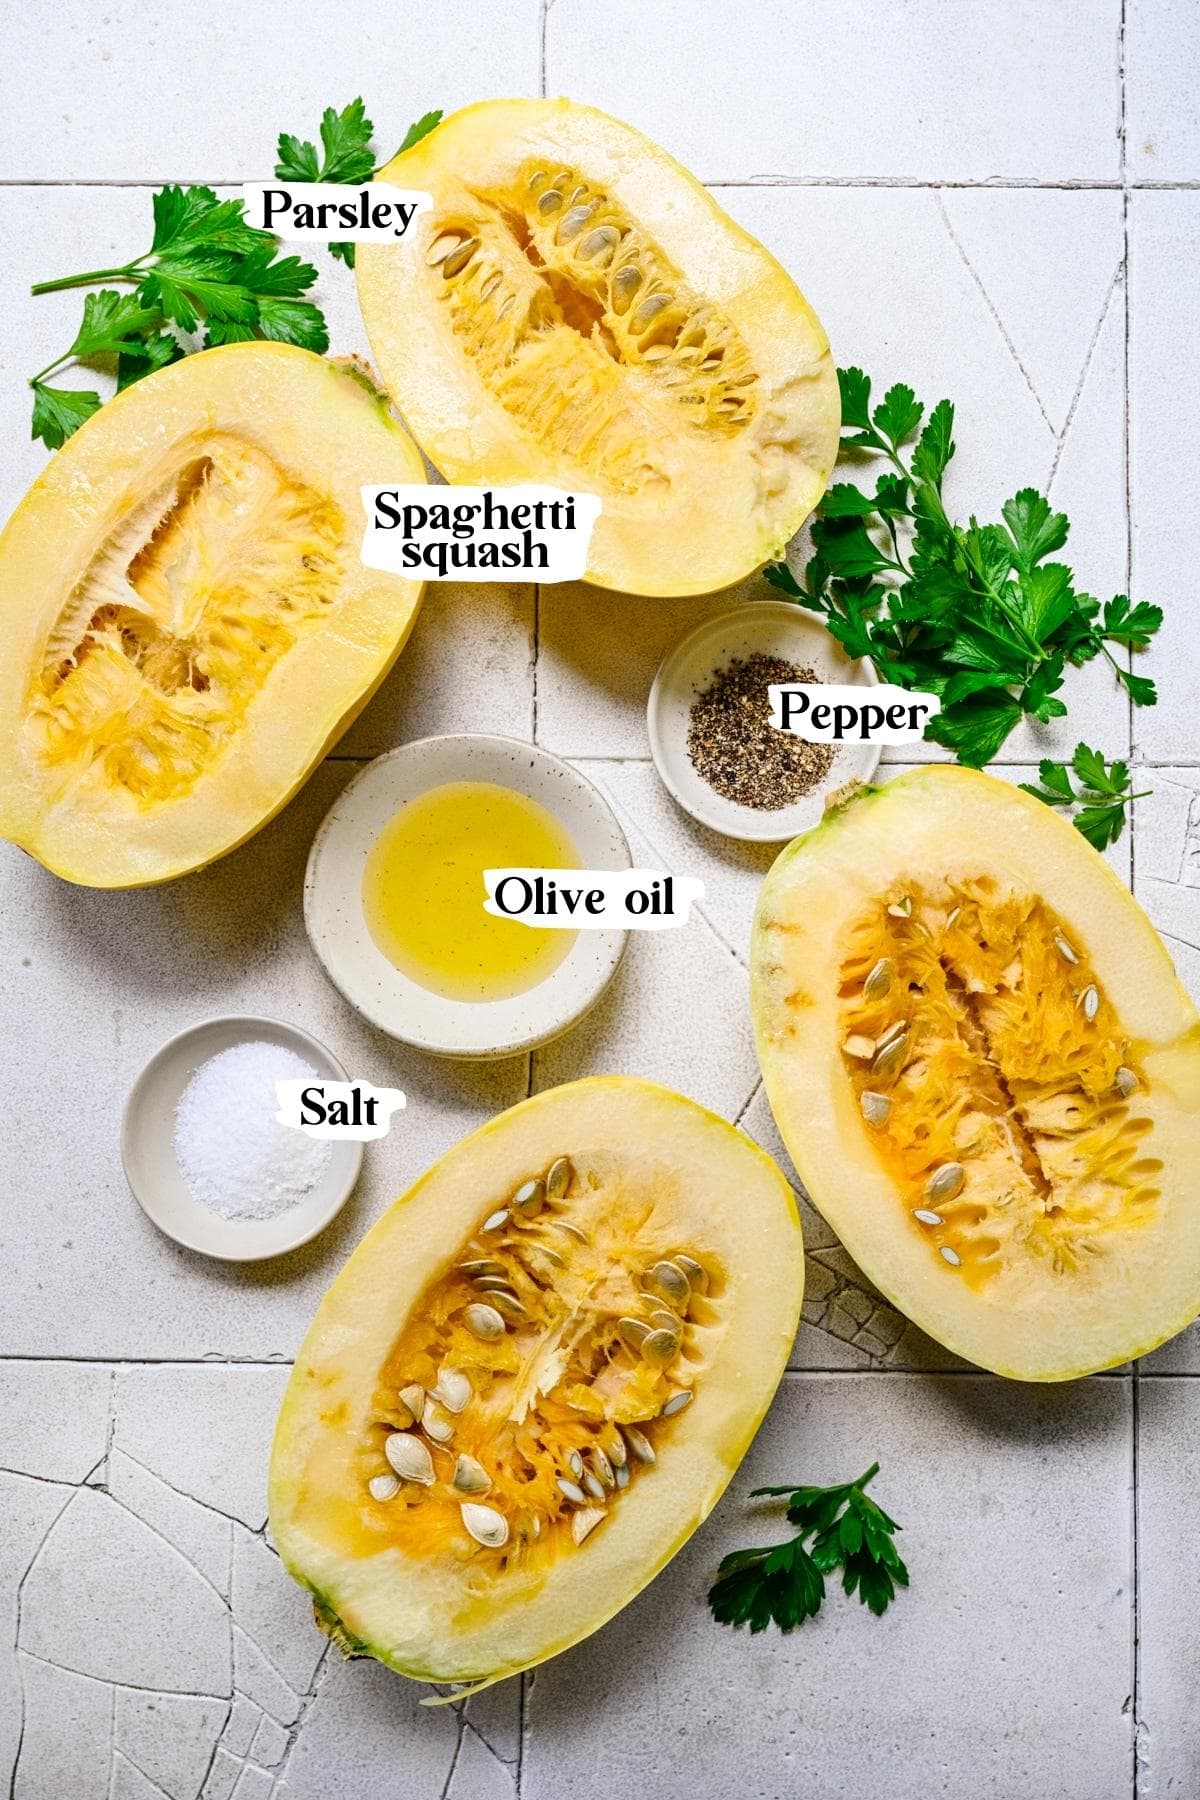 Overhead view of grilled spaghetti squash ingredients, including squash, salt, and pepper.